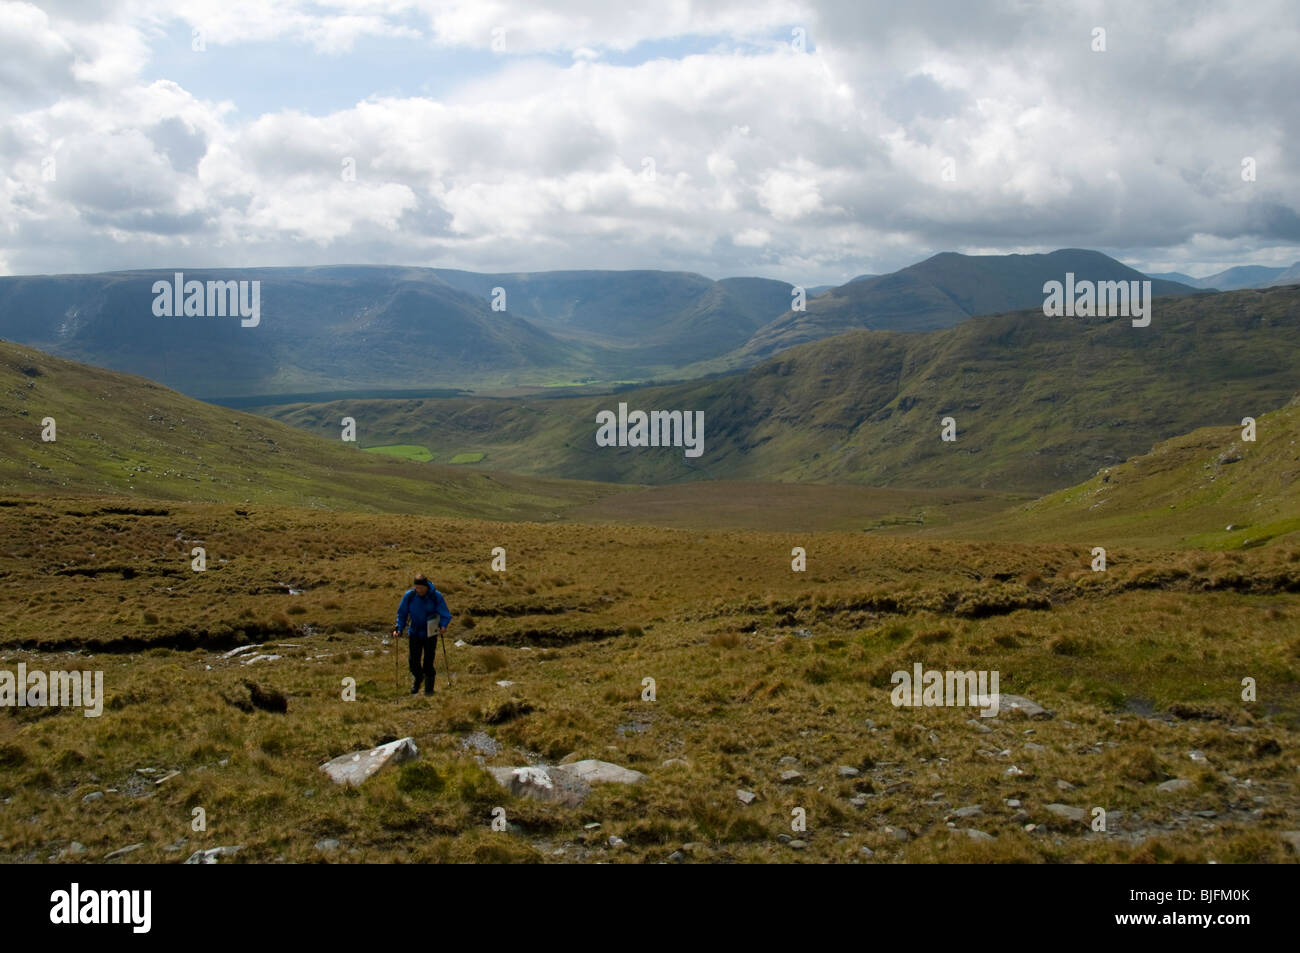 A walker in the Sheeffry Mountains, County Mayo, Ireland. The Maumtrasna plateau, Partry Mountains, in the distance. Stock Photo